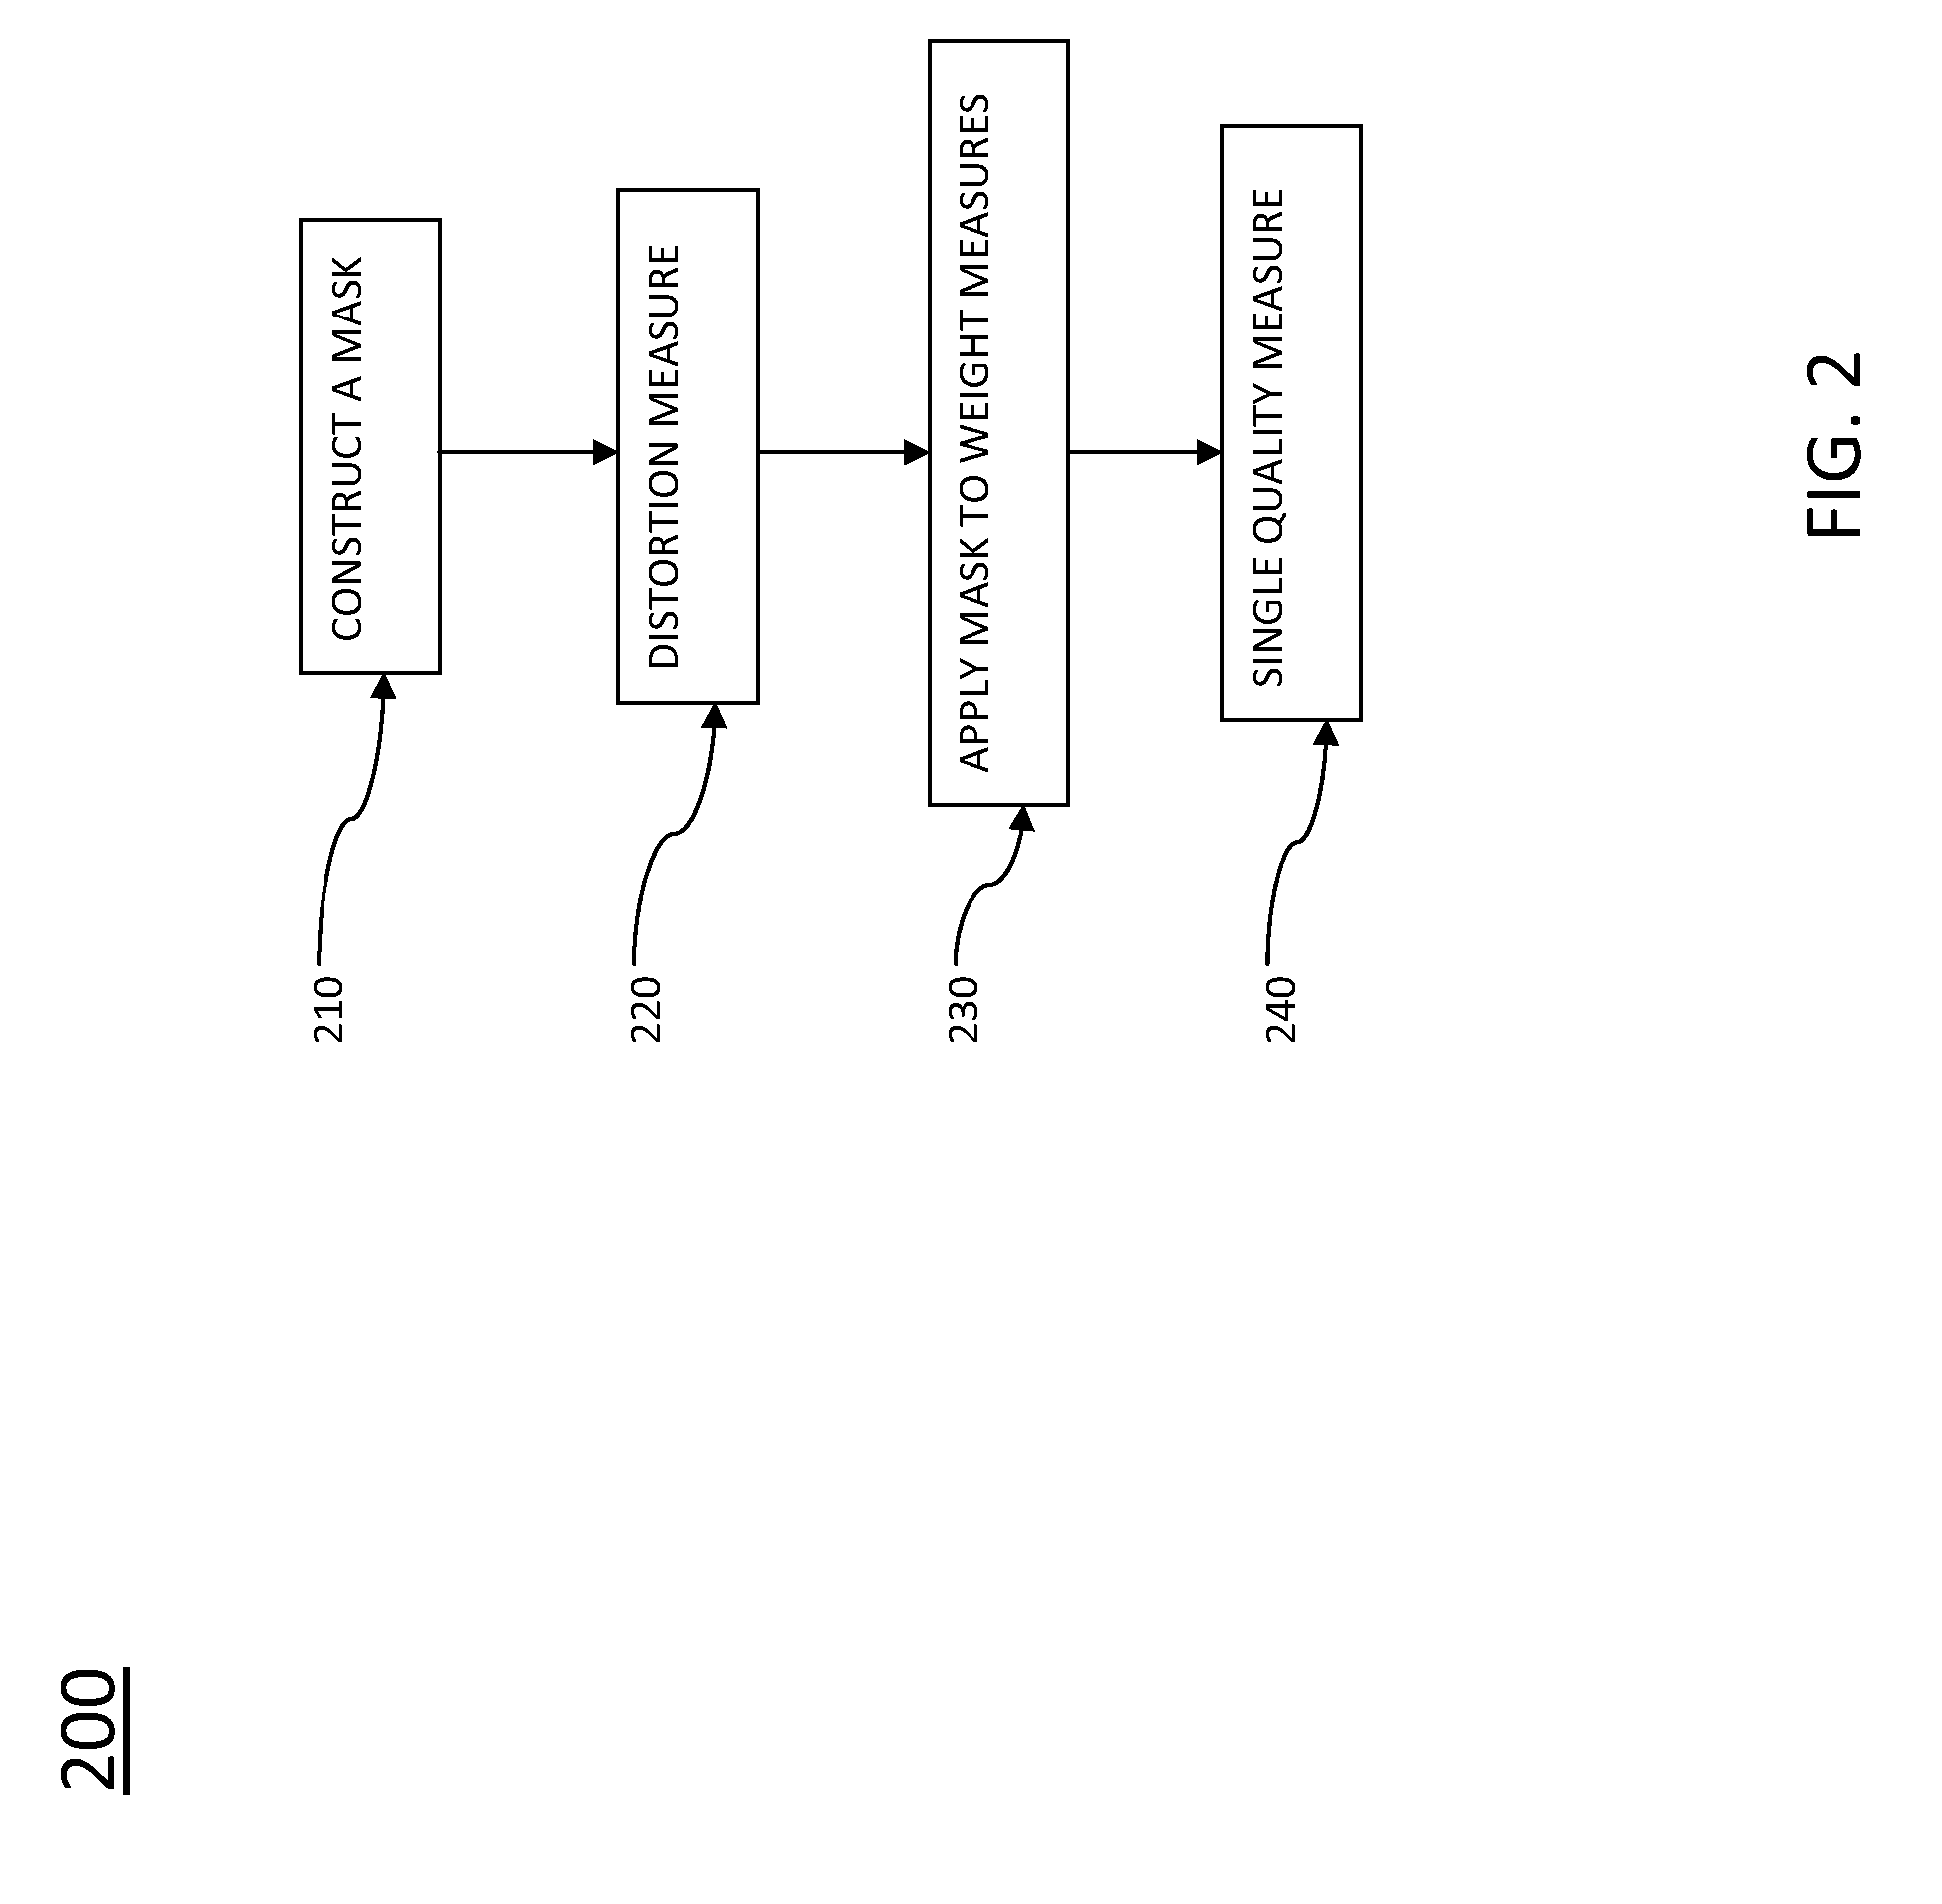 Methods of compressing data and methods of assessing the same